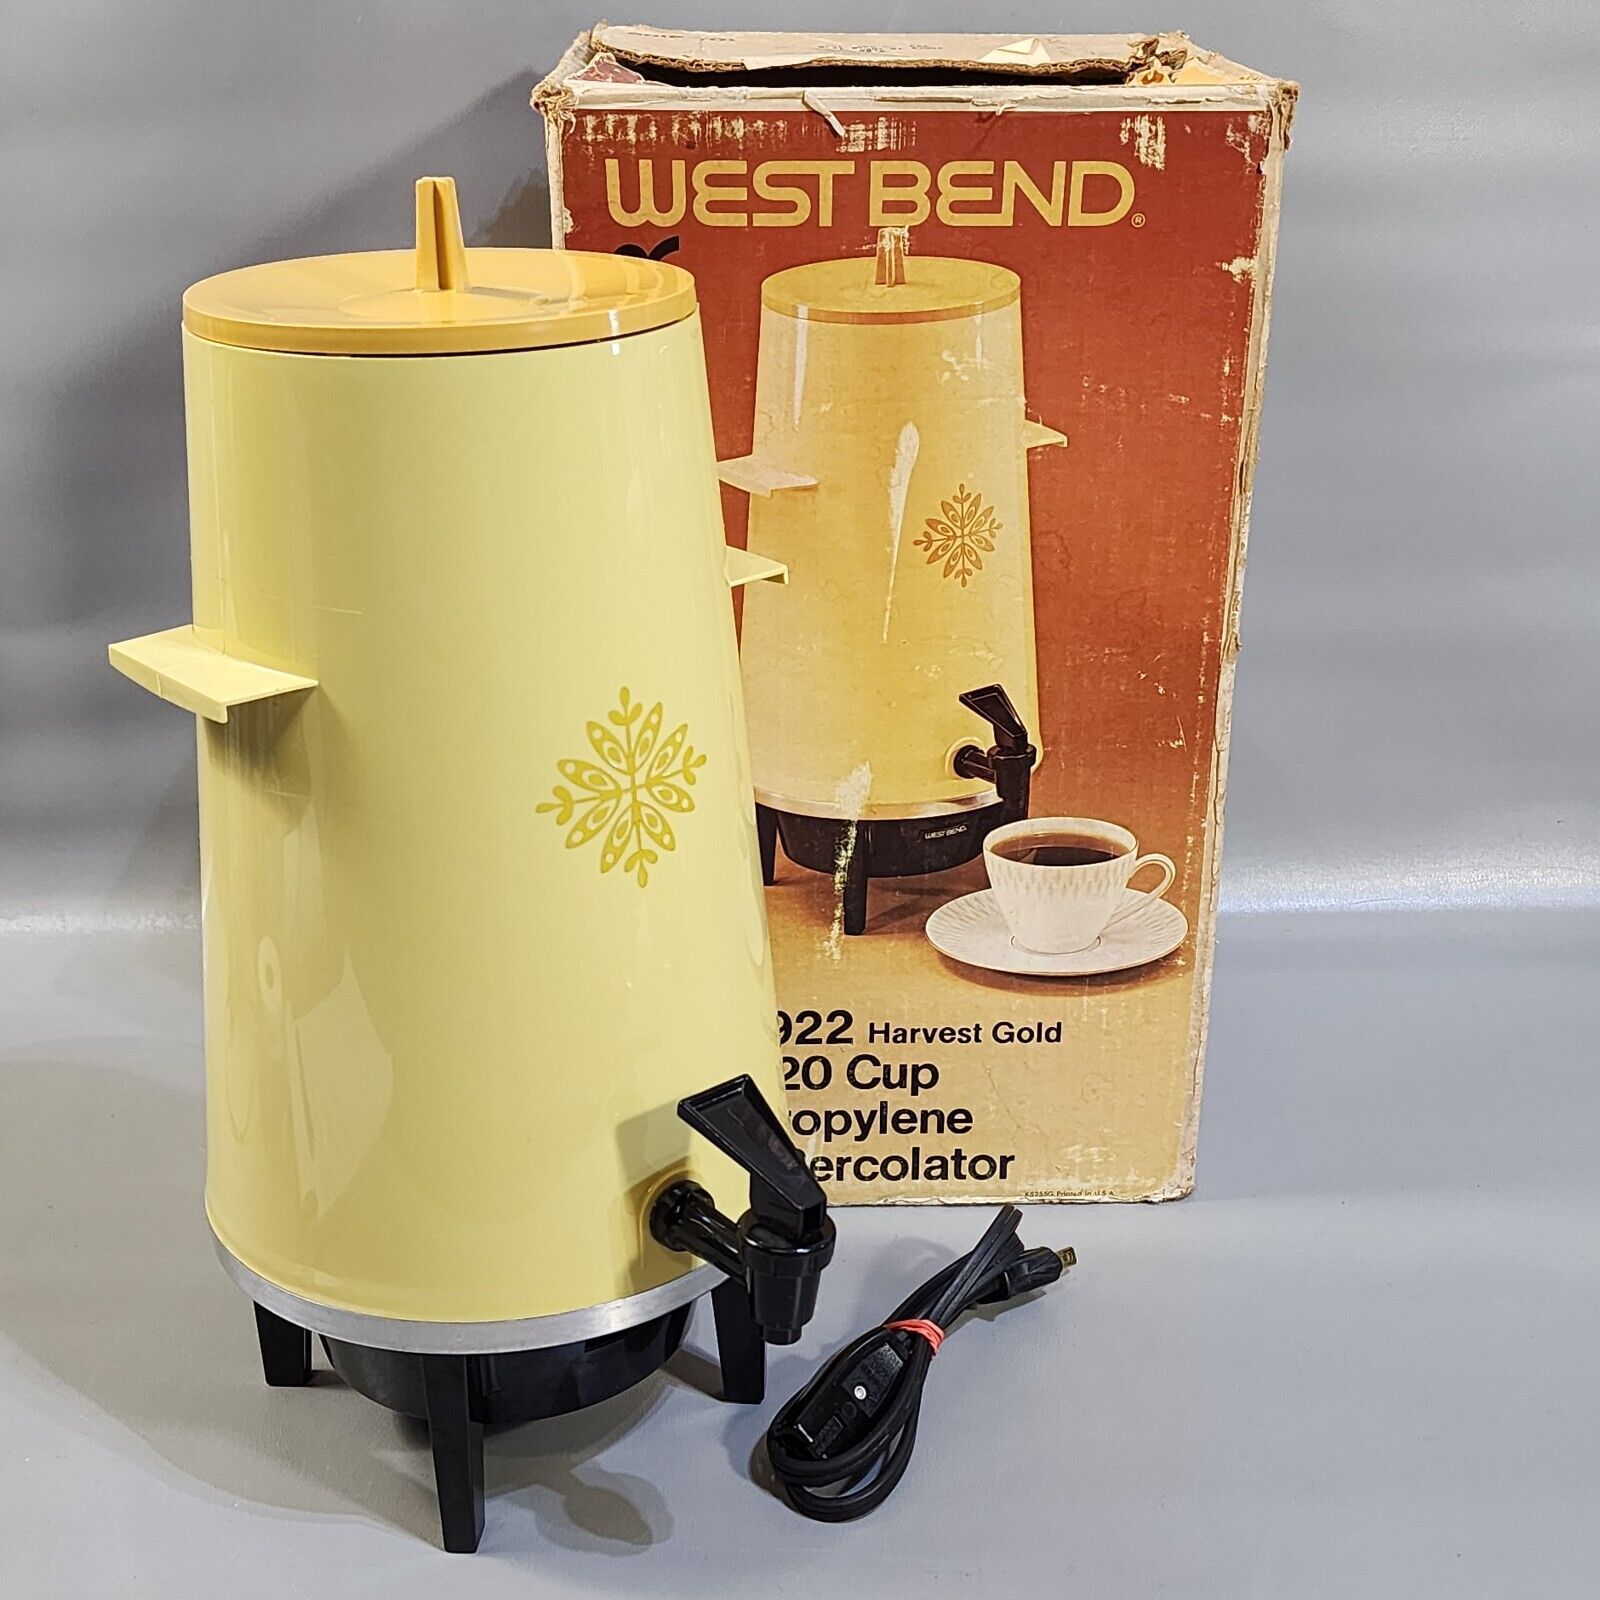 Vintage West Bend Coffee Maker Harvest Gold Automatic 10-20 Cup Party Percolator